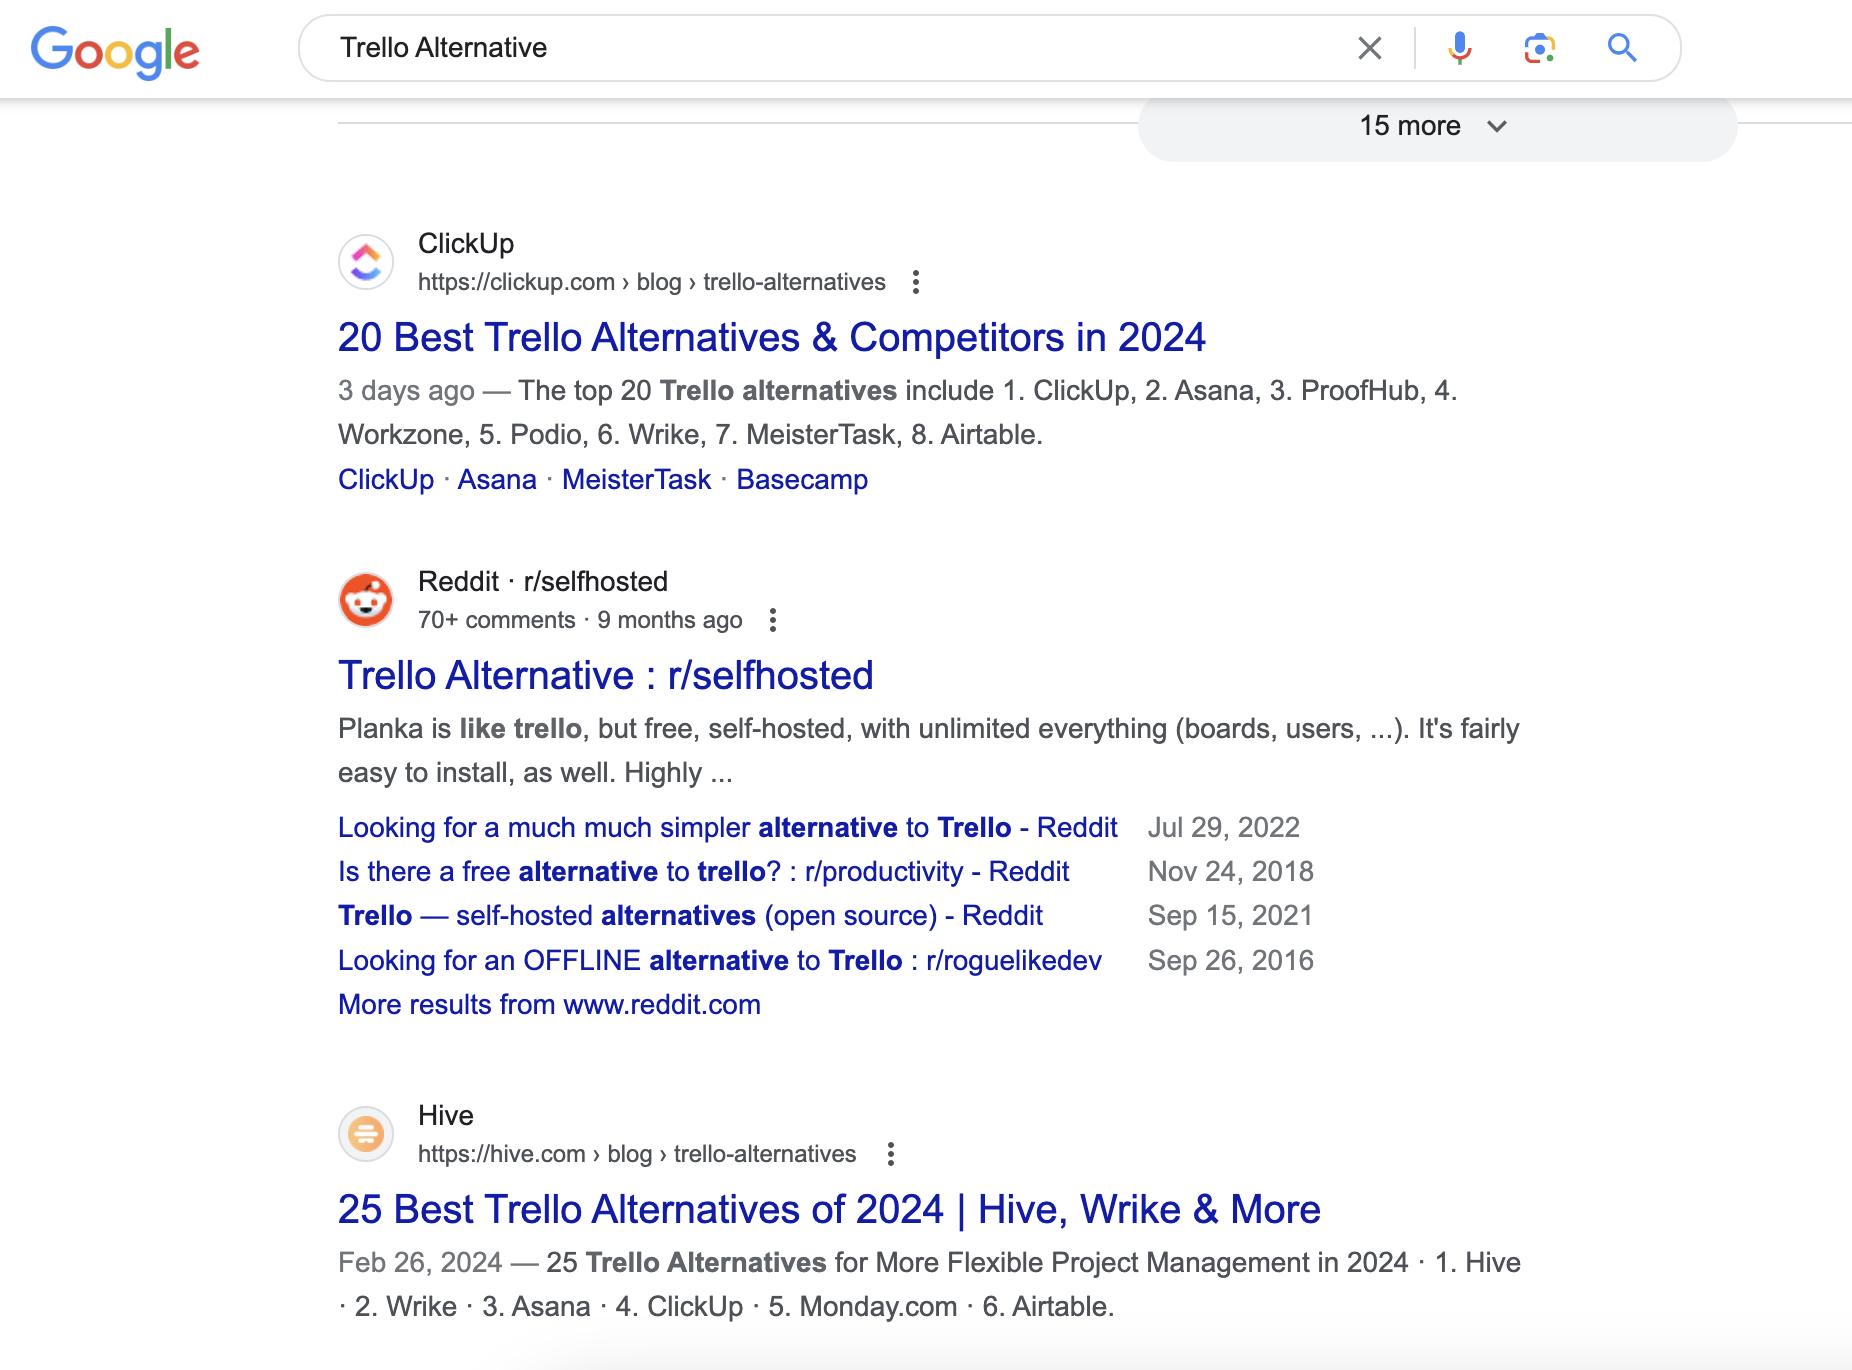 A subreddit post about Trello alternatives is also featured prominently in the SERPs for this search term